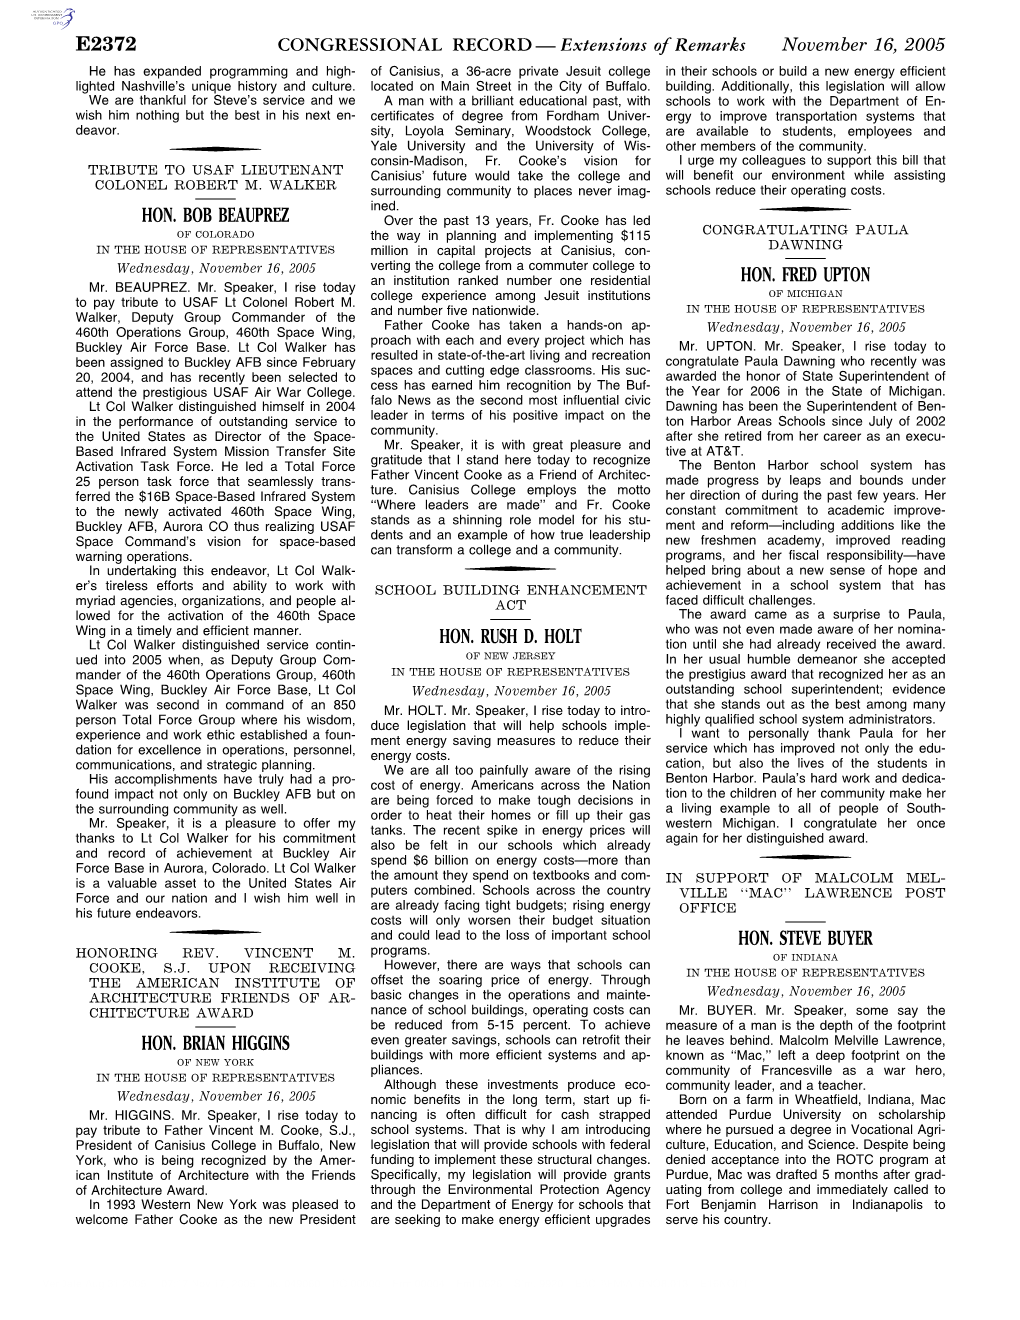 CONGRESSIONAL RECORD— Extensions of Remarks E2372 HON